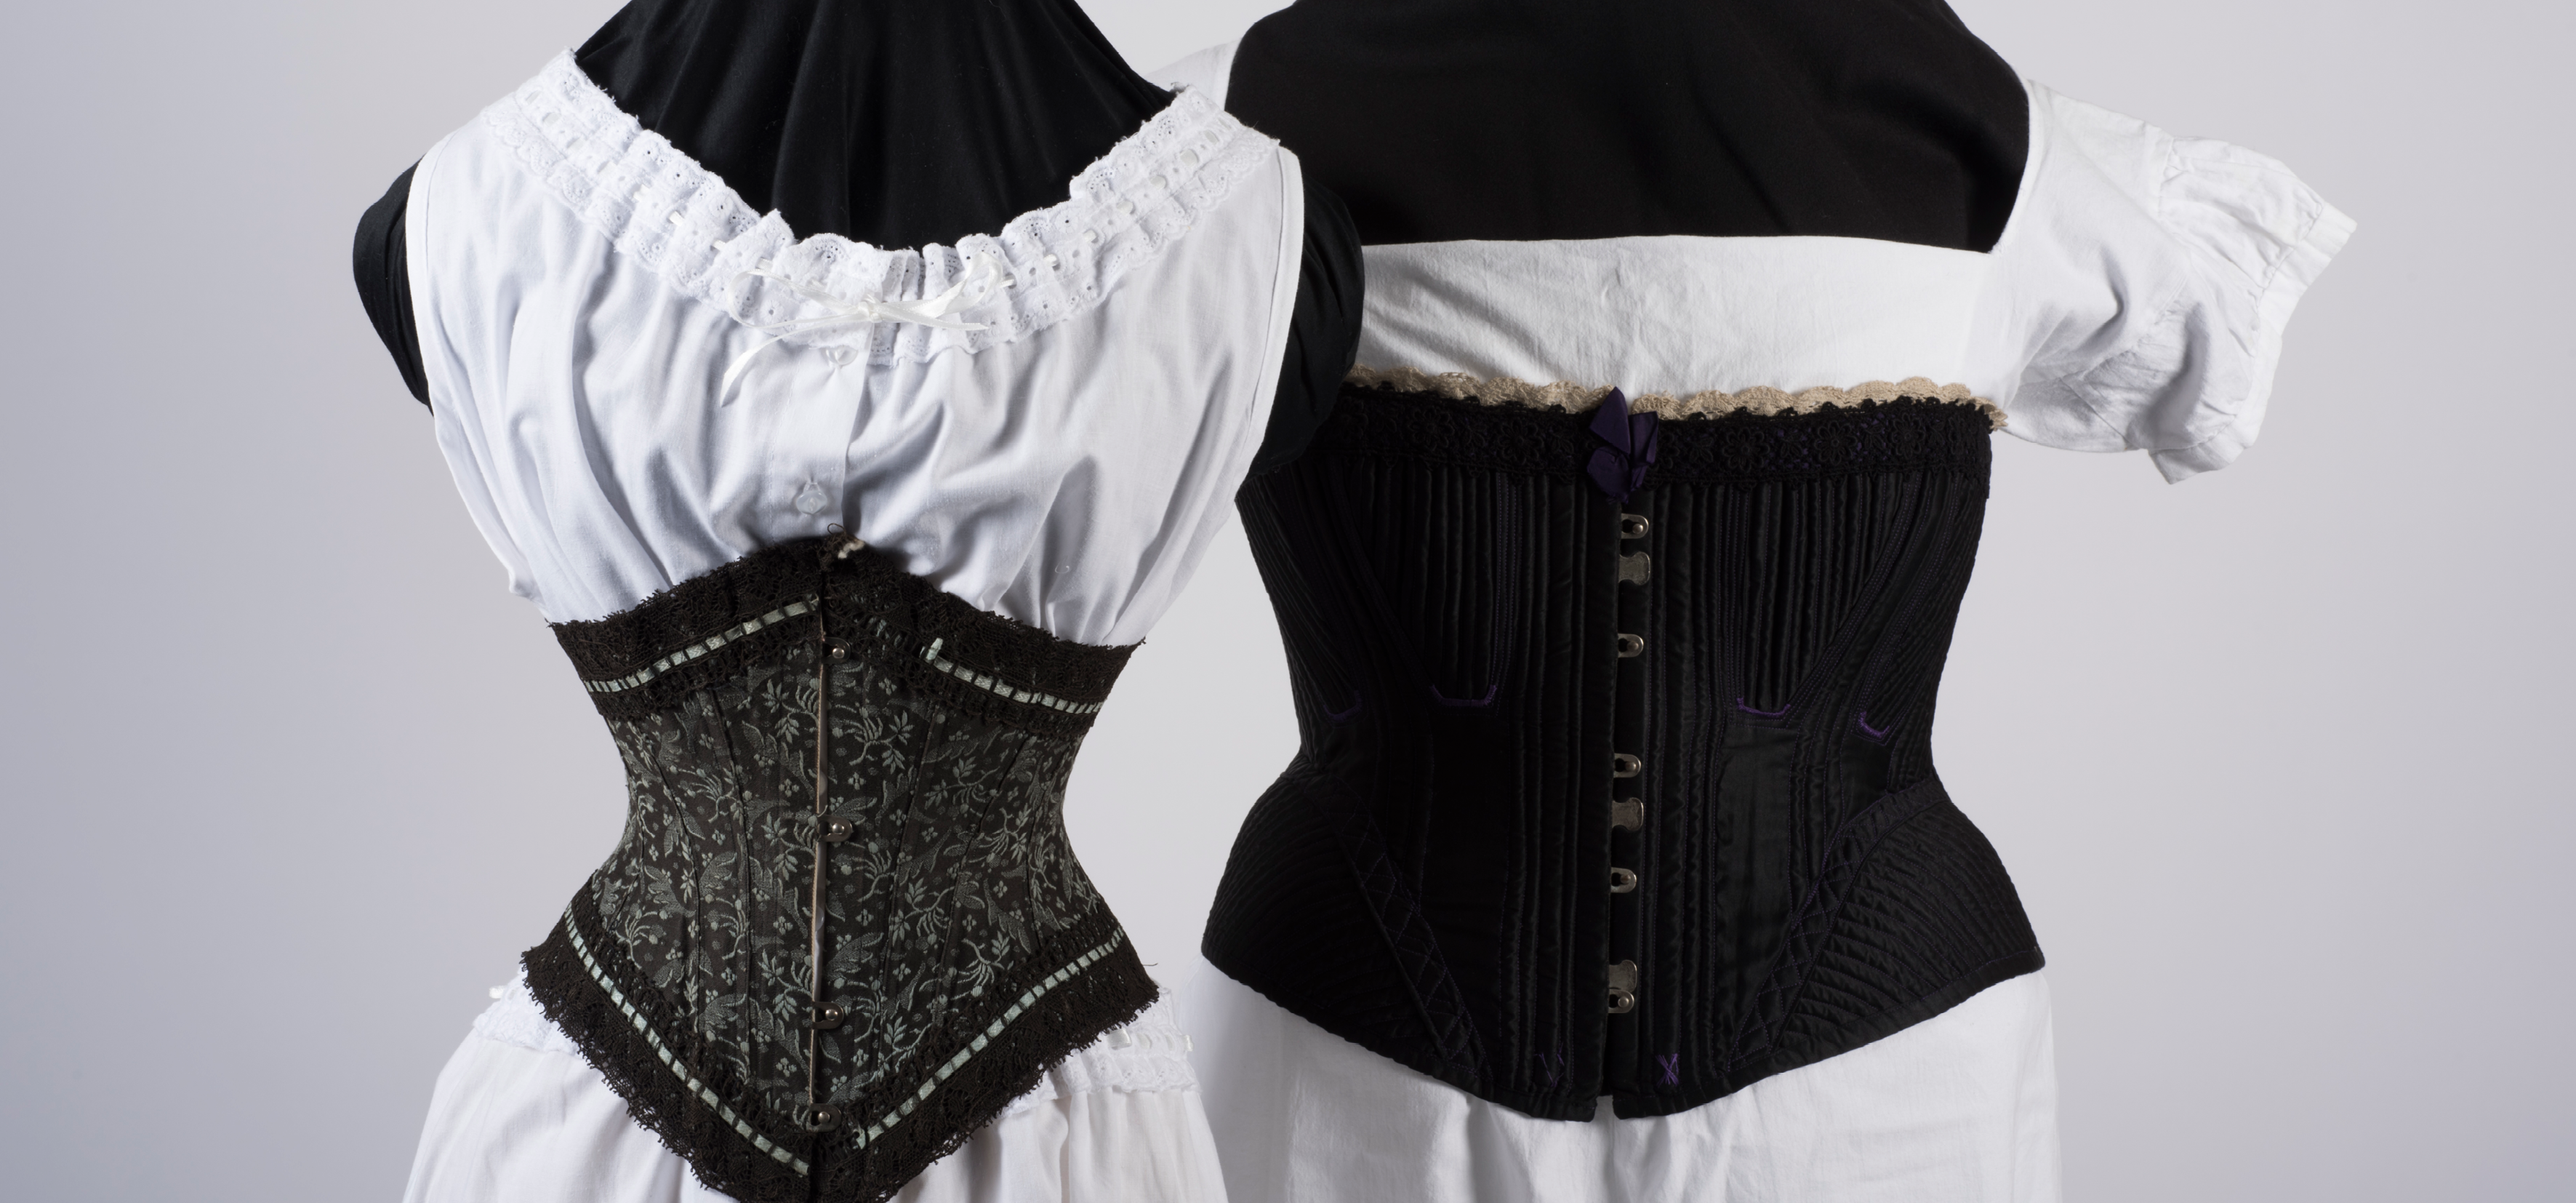 Here's How I Recreated a Real Victorian Corset